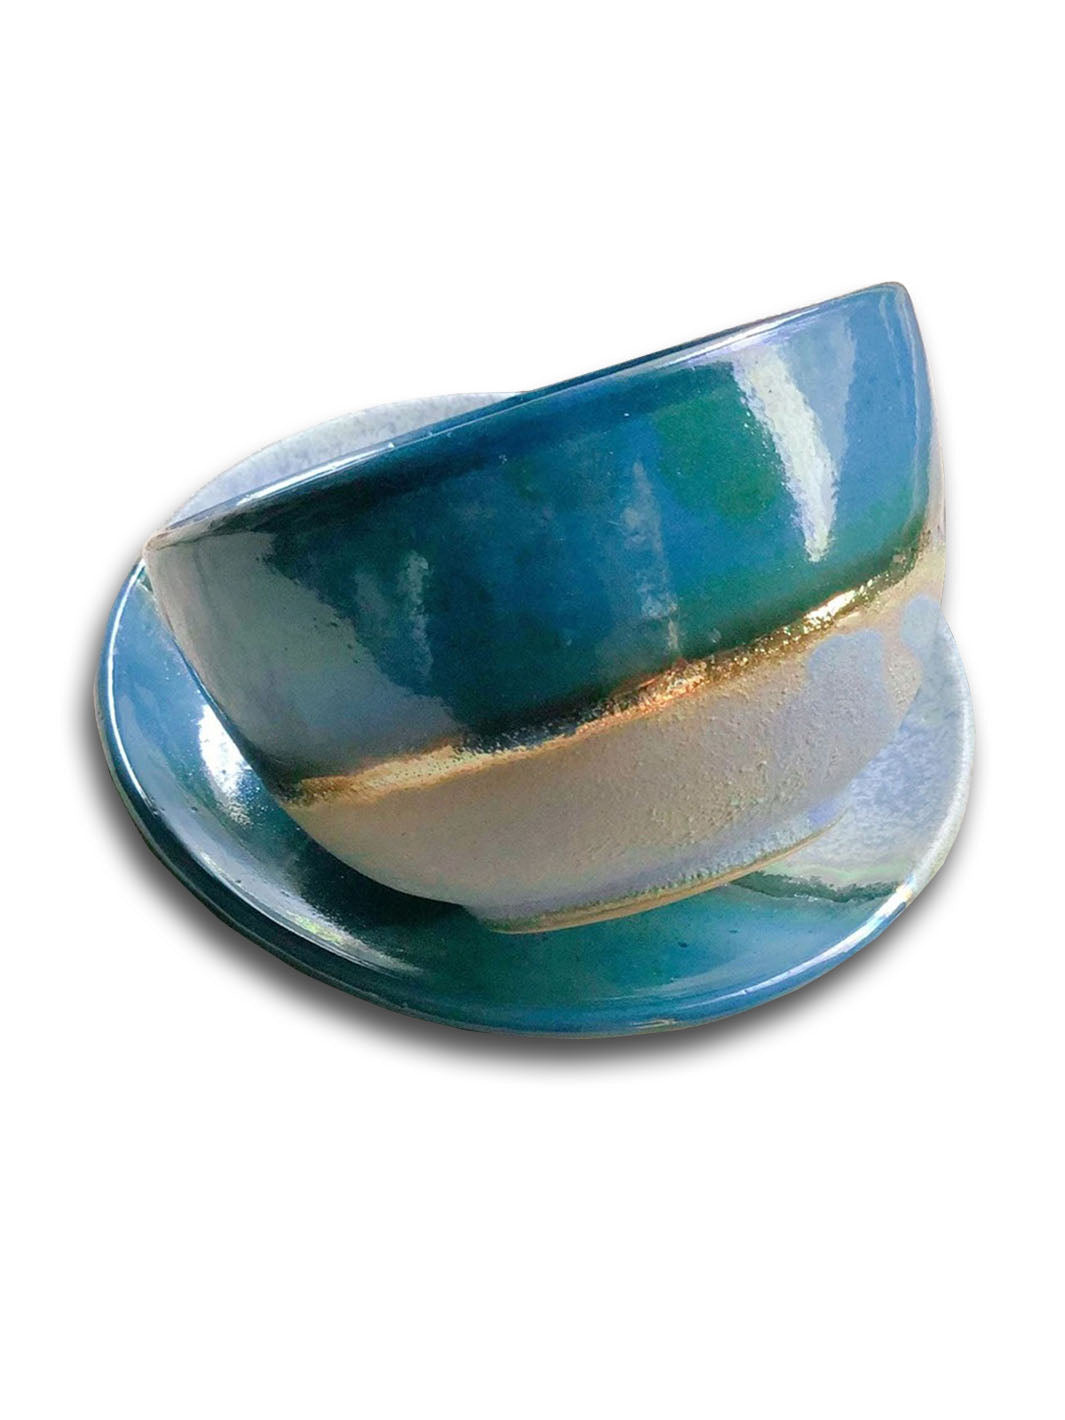 Artistic Handcrafted Peacock Ceramic Cappuccino Cup Deco Cups DCB0032-1